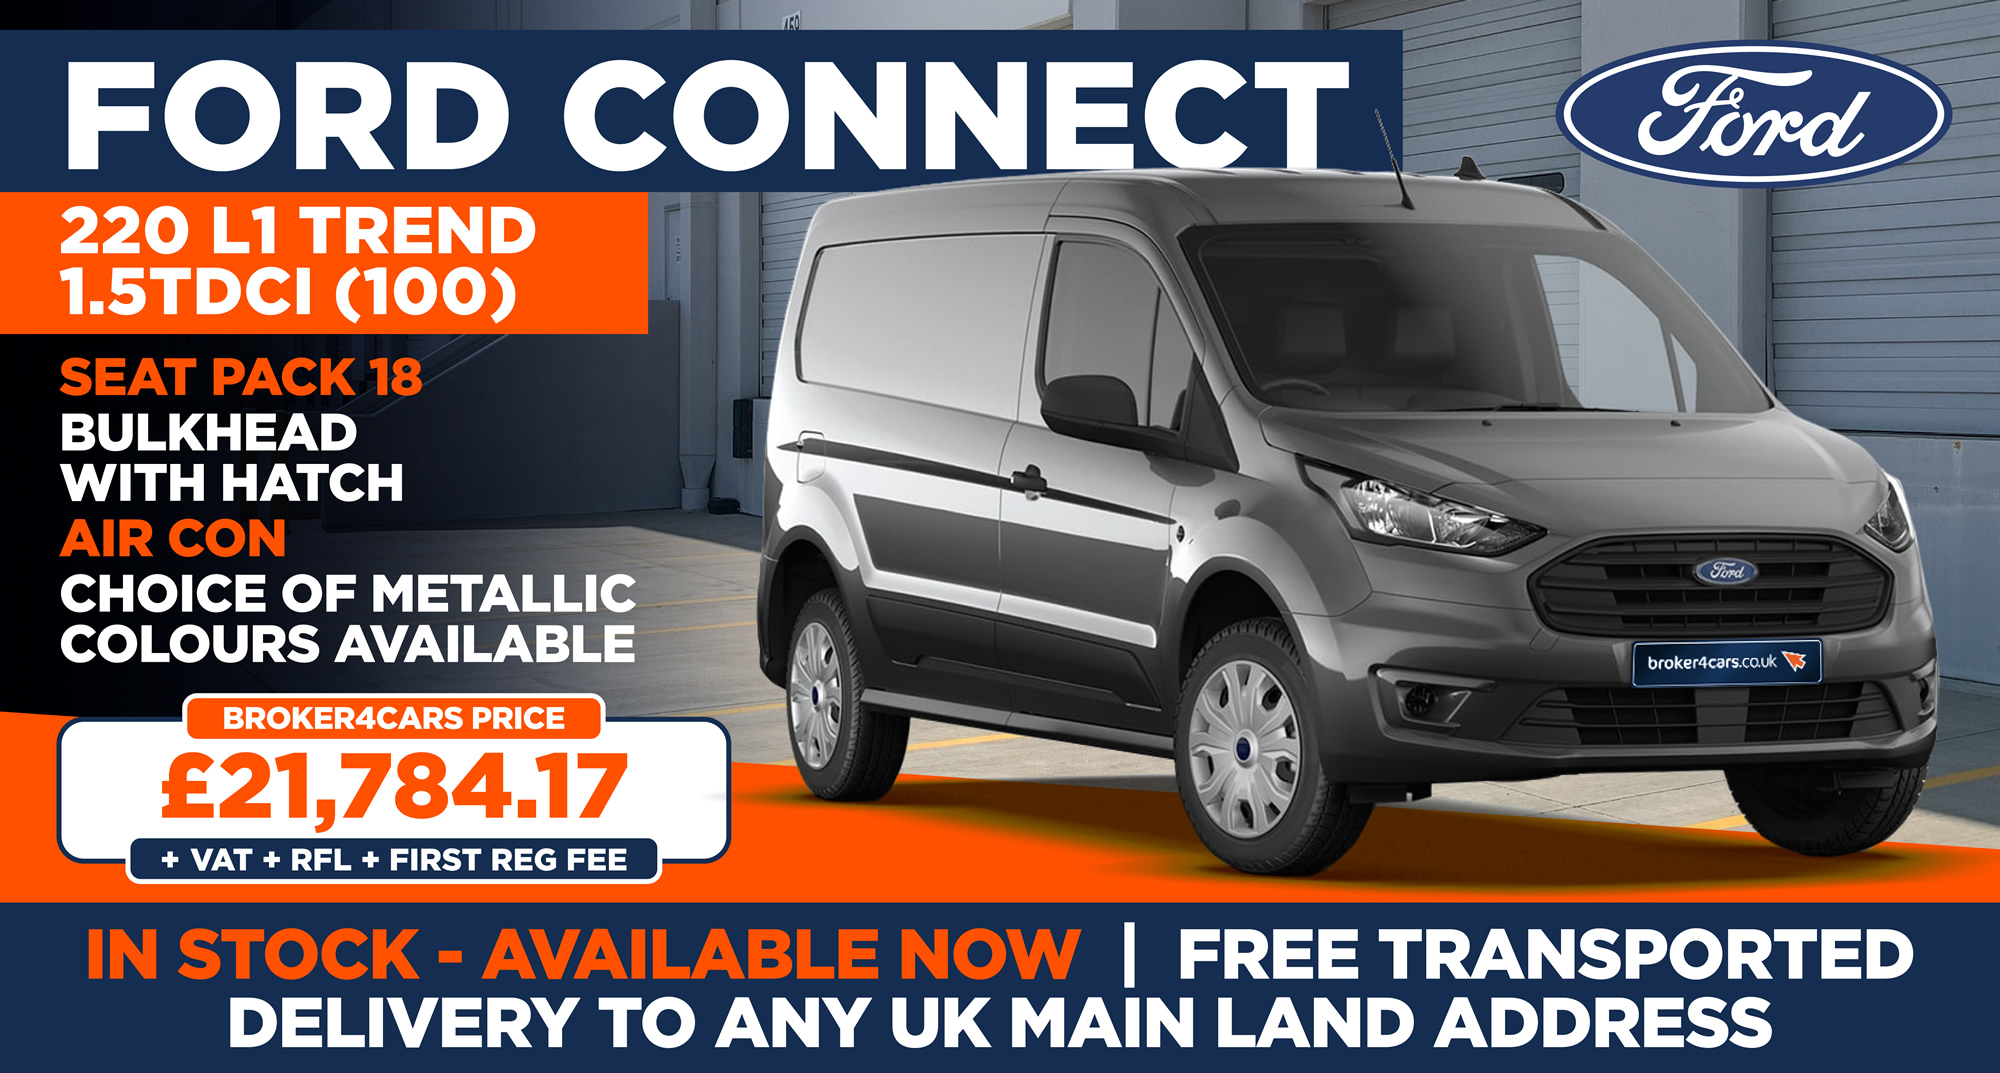 Ford Connect 220 L1 Trend 1.5TDCI (100)Seat Pack 18, Bulkhead with Hatch, Air Con, Choice of Metallic Colours Available